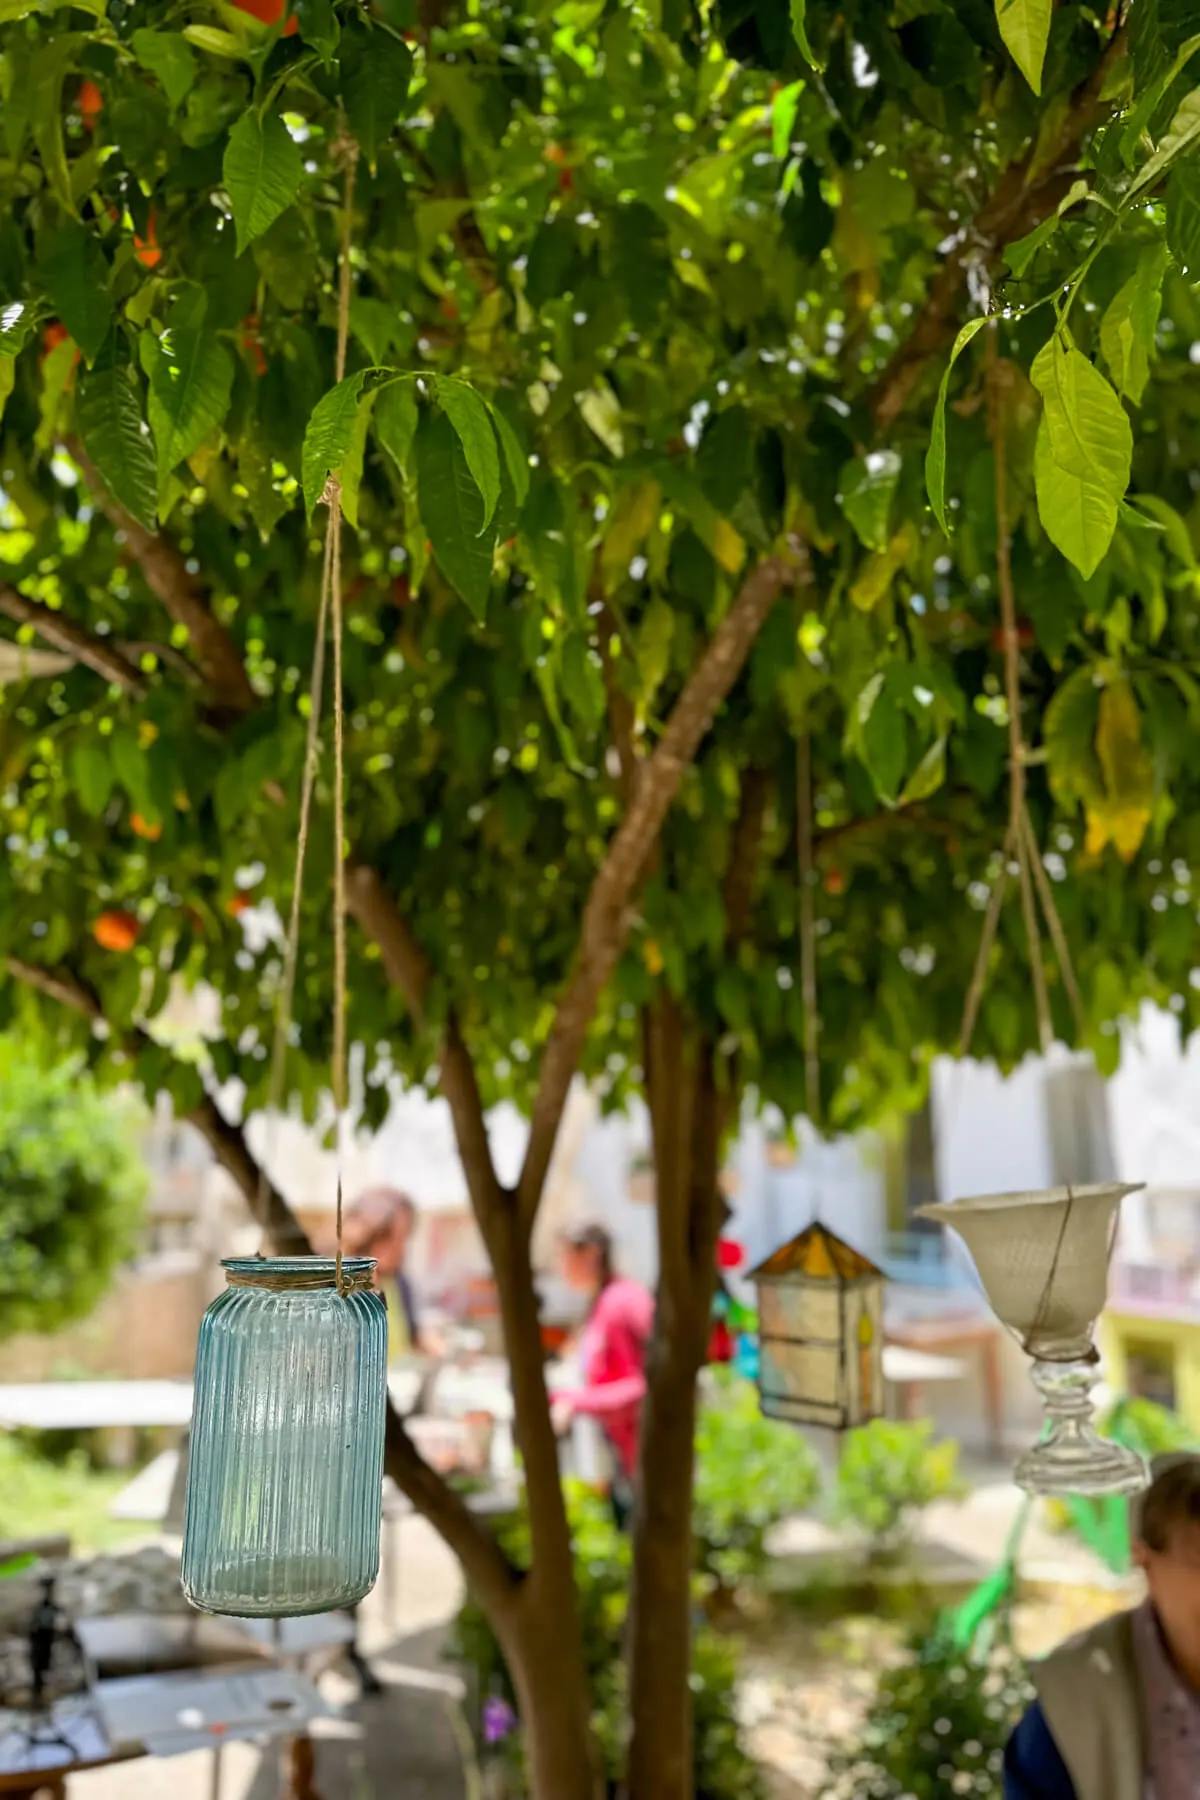 Glass jars and other items hanging down out of the orange tree in the mosaics yard